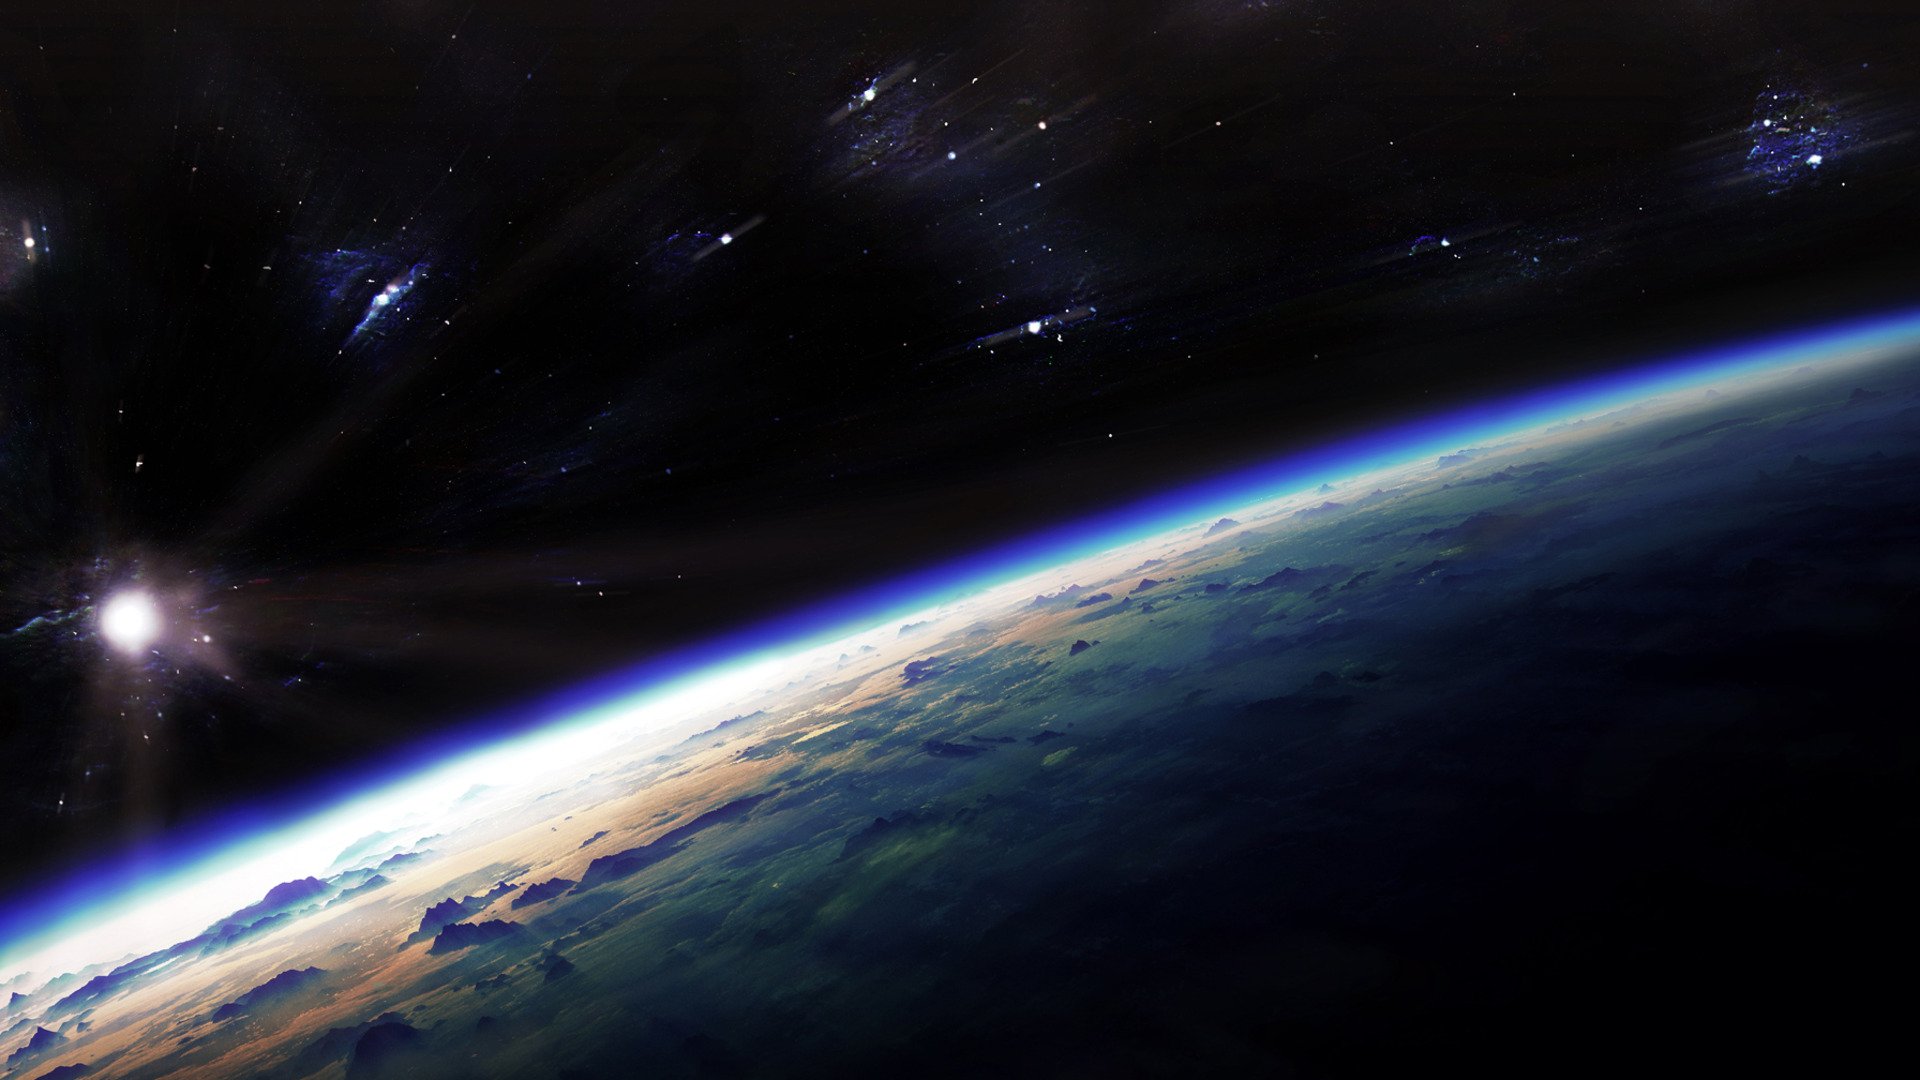 From Space HD Wallpaper Background Image